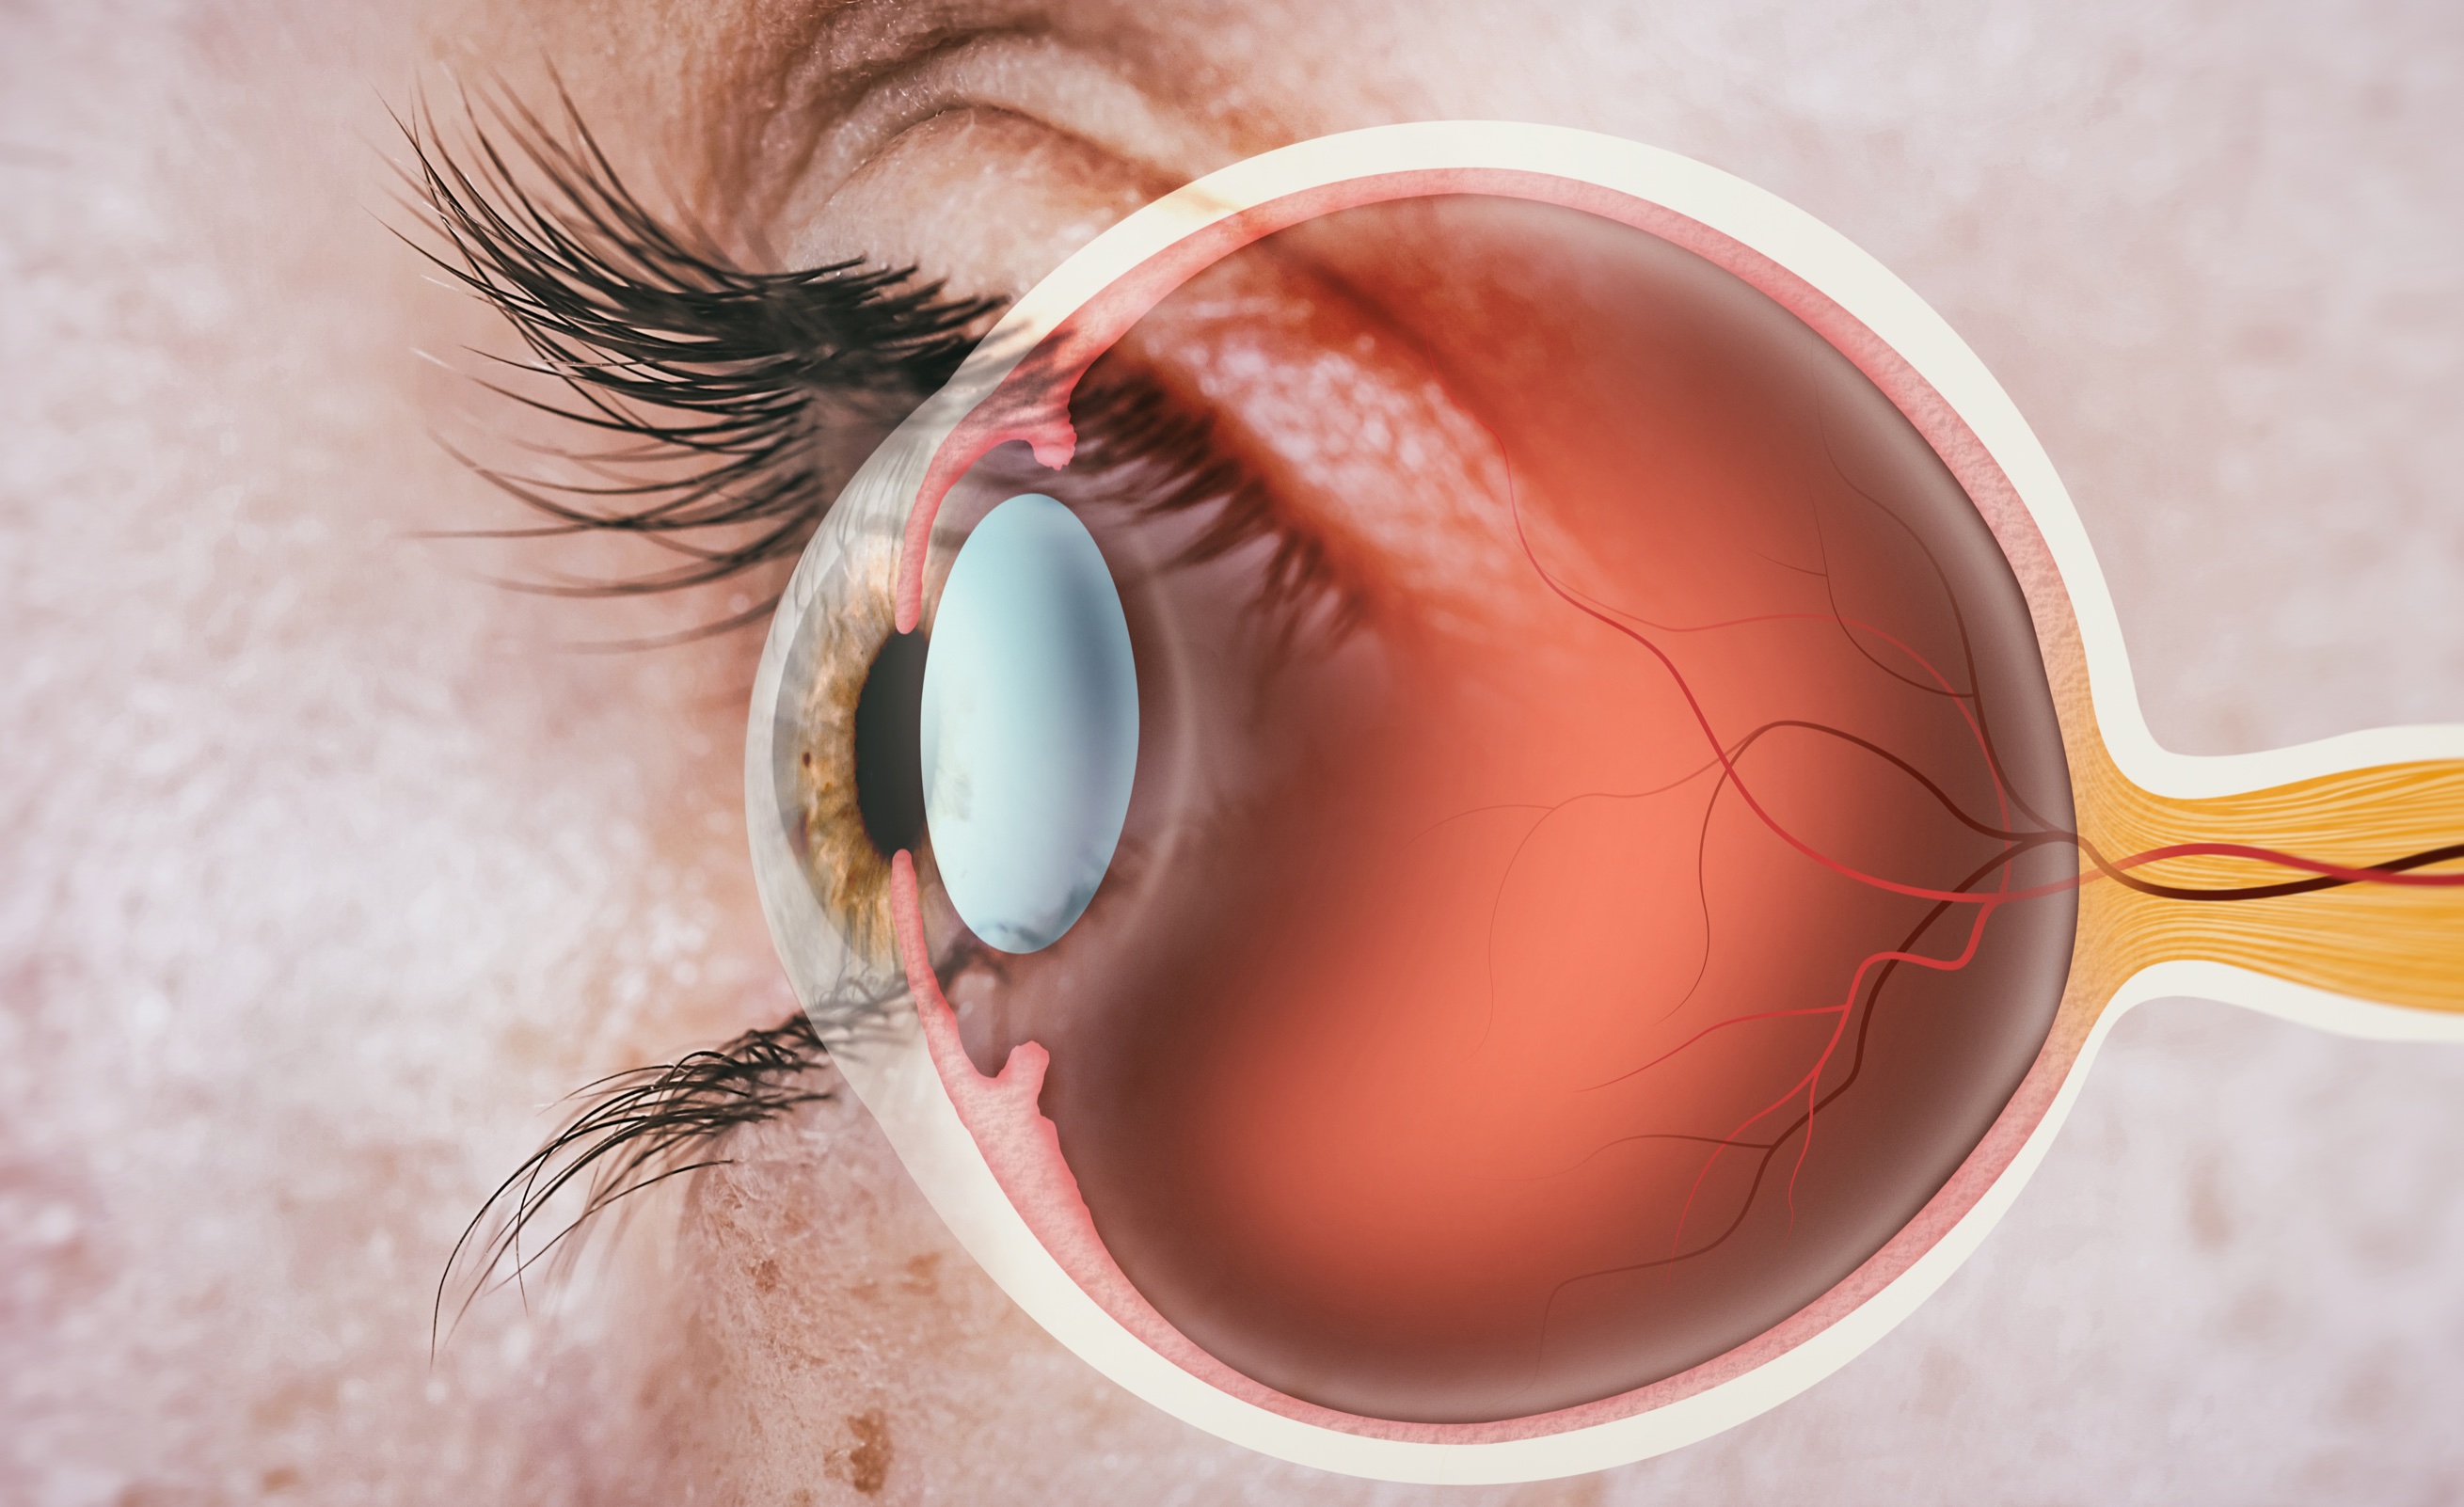 dry macular degeneration research